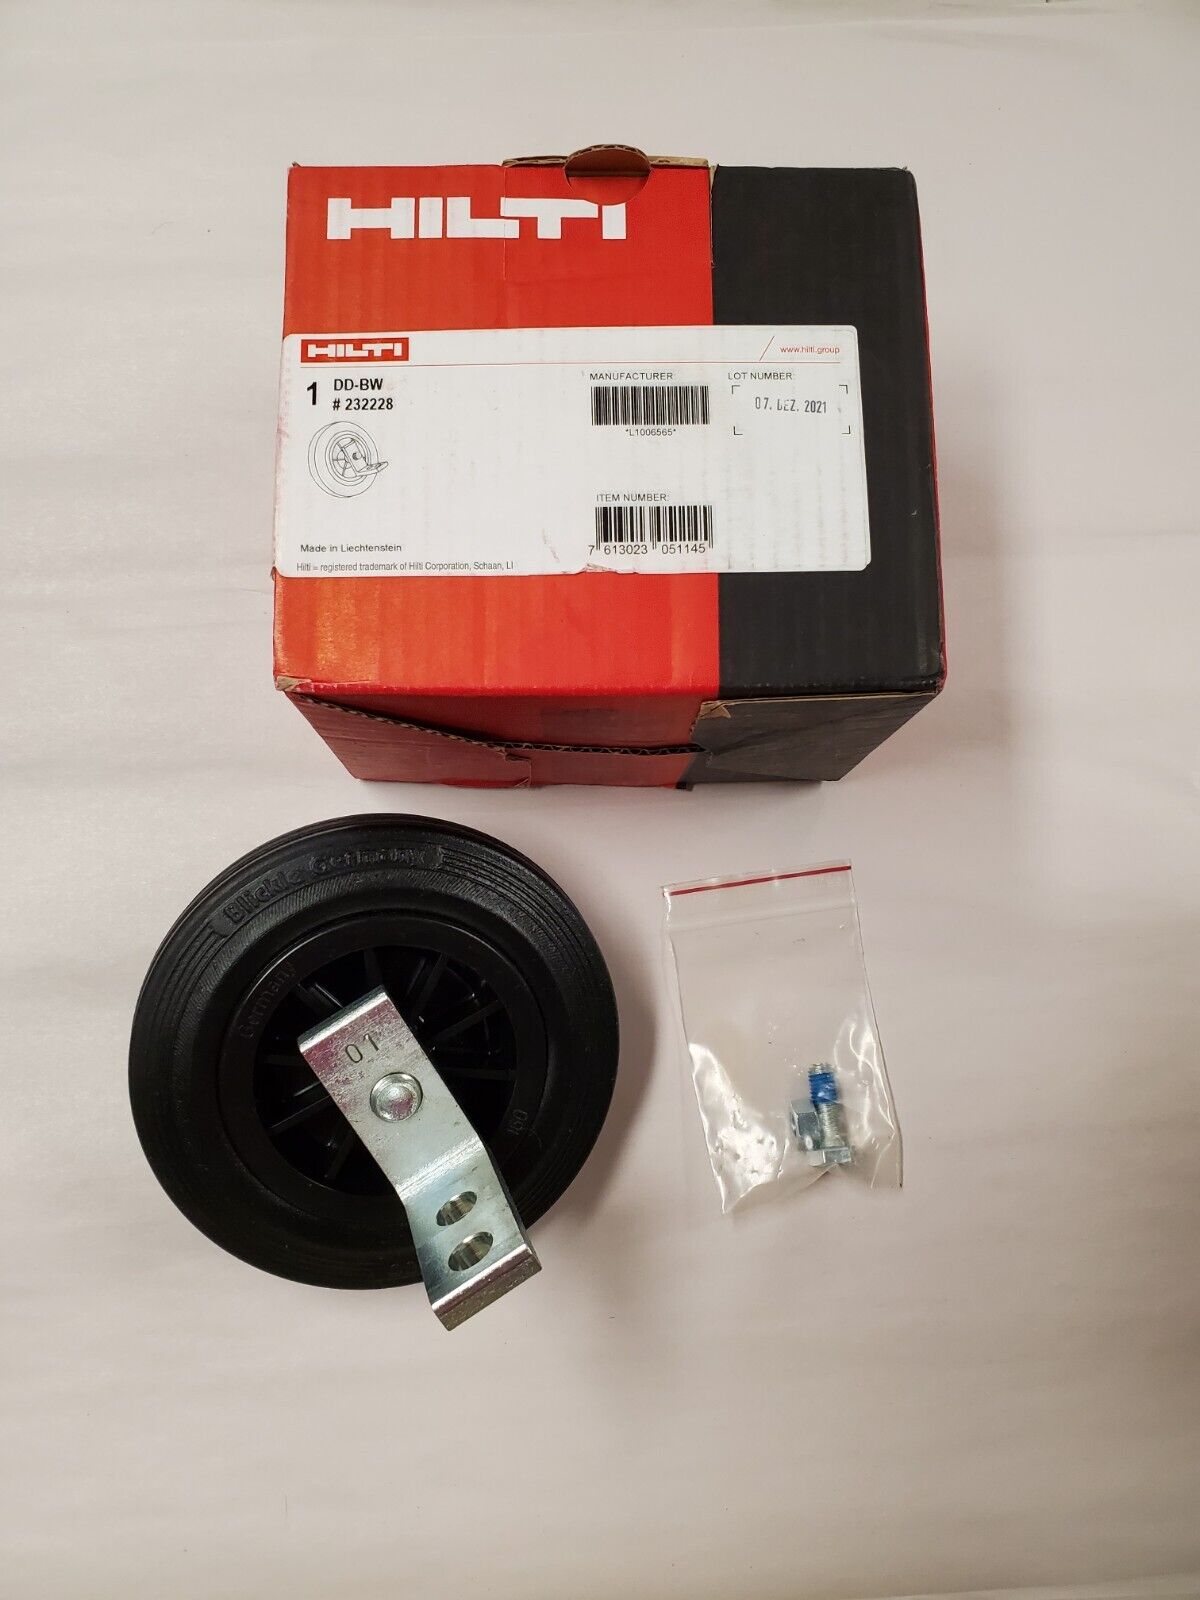 HILTI Wheel Assembly DD-BW #232228 for DD-ST Drill Stands *FREE SHIPPING*